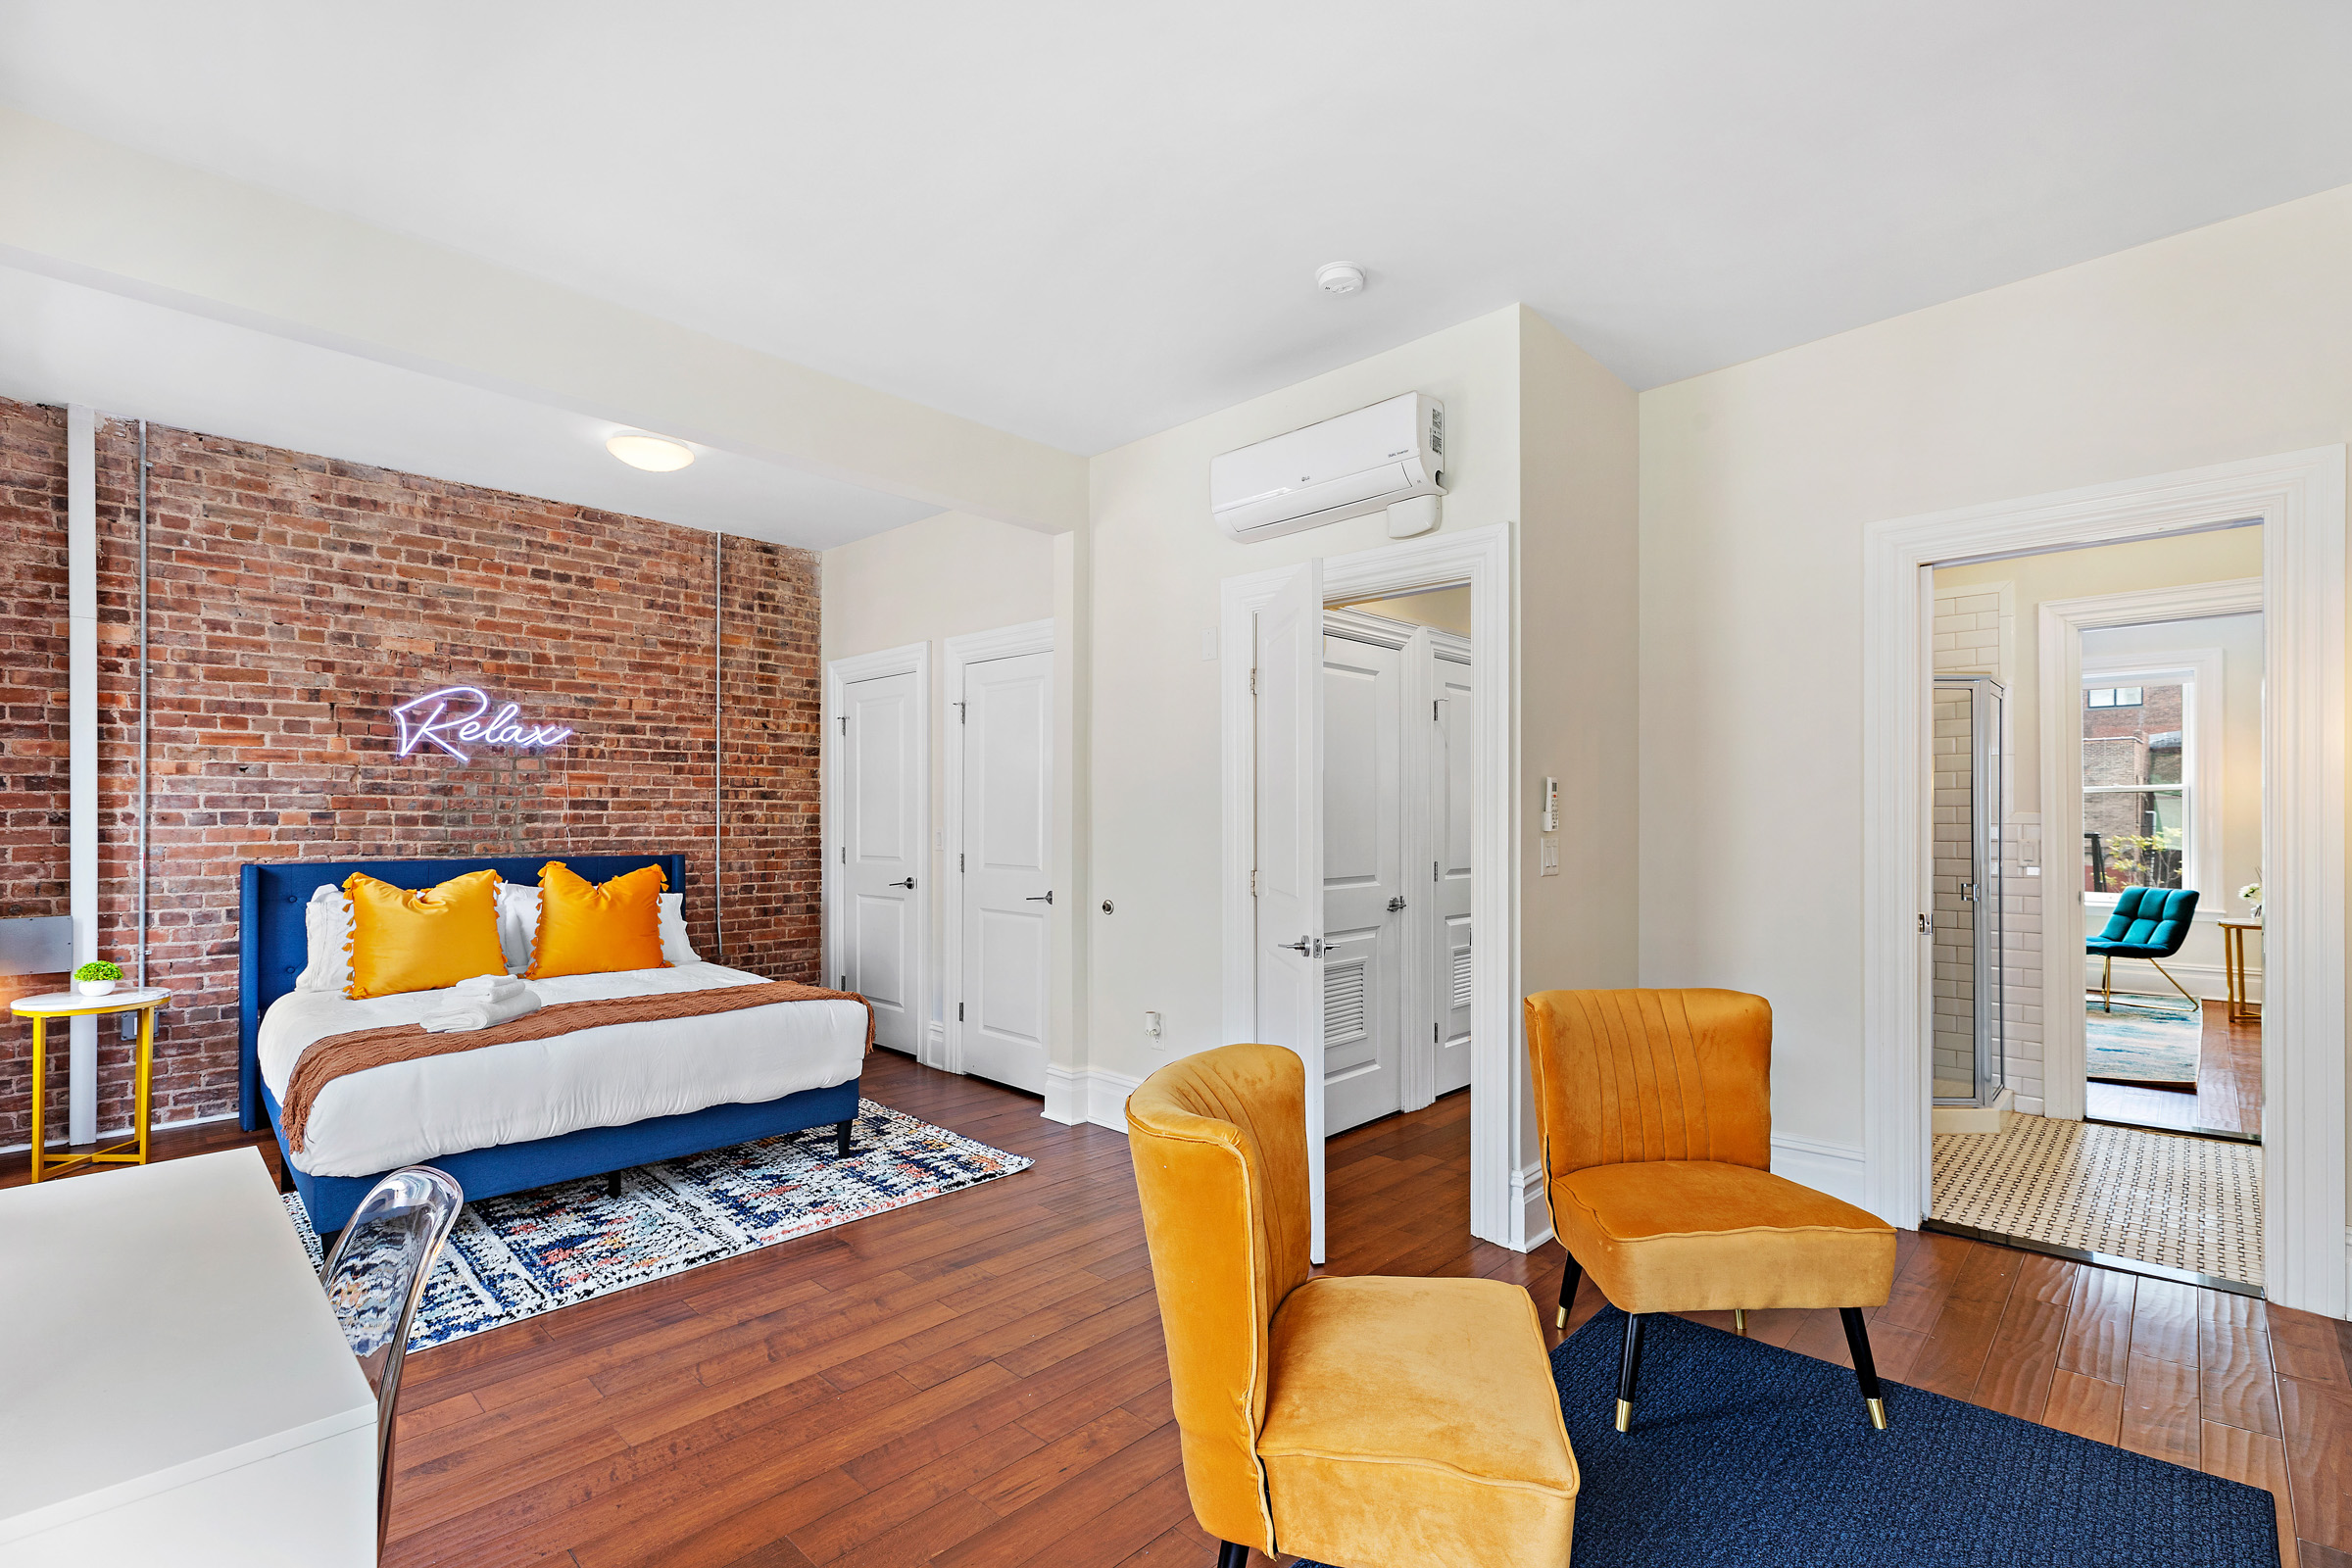 Exposed brick bedroom with orange and blue theme. Blue area rug with two orange chairs in front of a white bed with blue headboard and orange pillows.